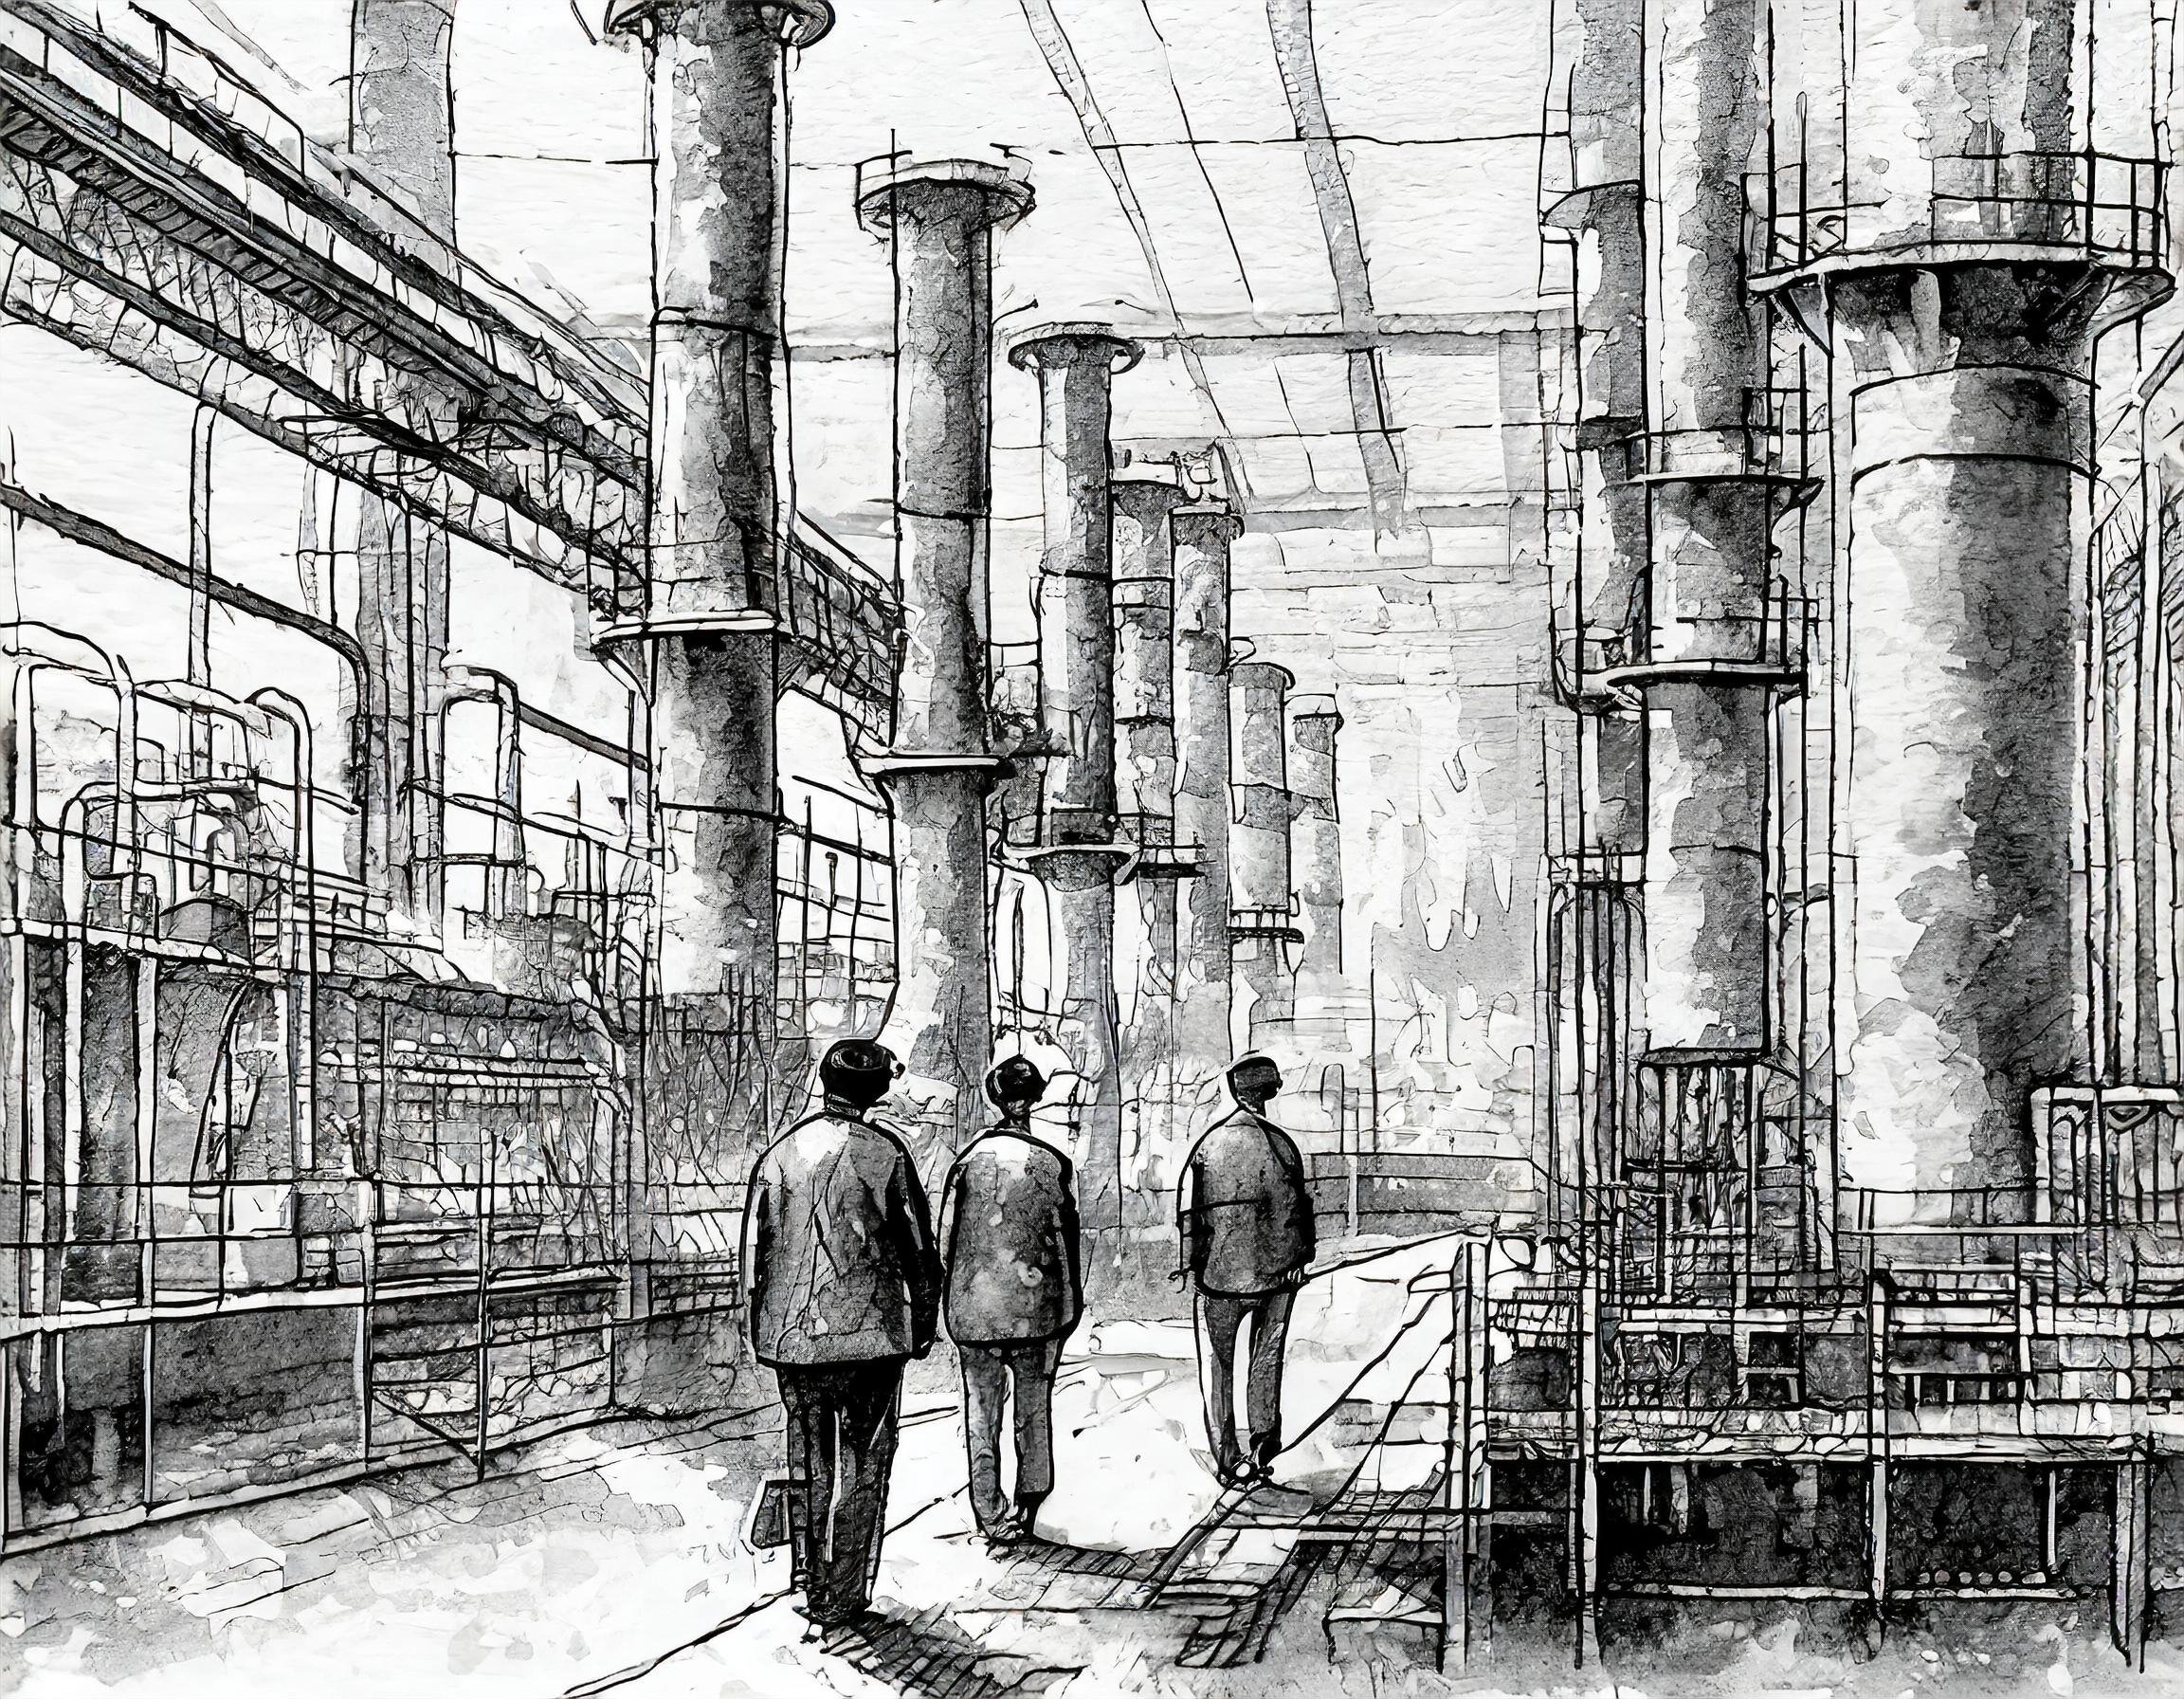 Sketch in black and white, late thirties of the twentieth century, showing a large chemical plant in the style of the IG Farben factories, with workers